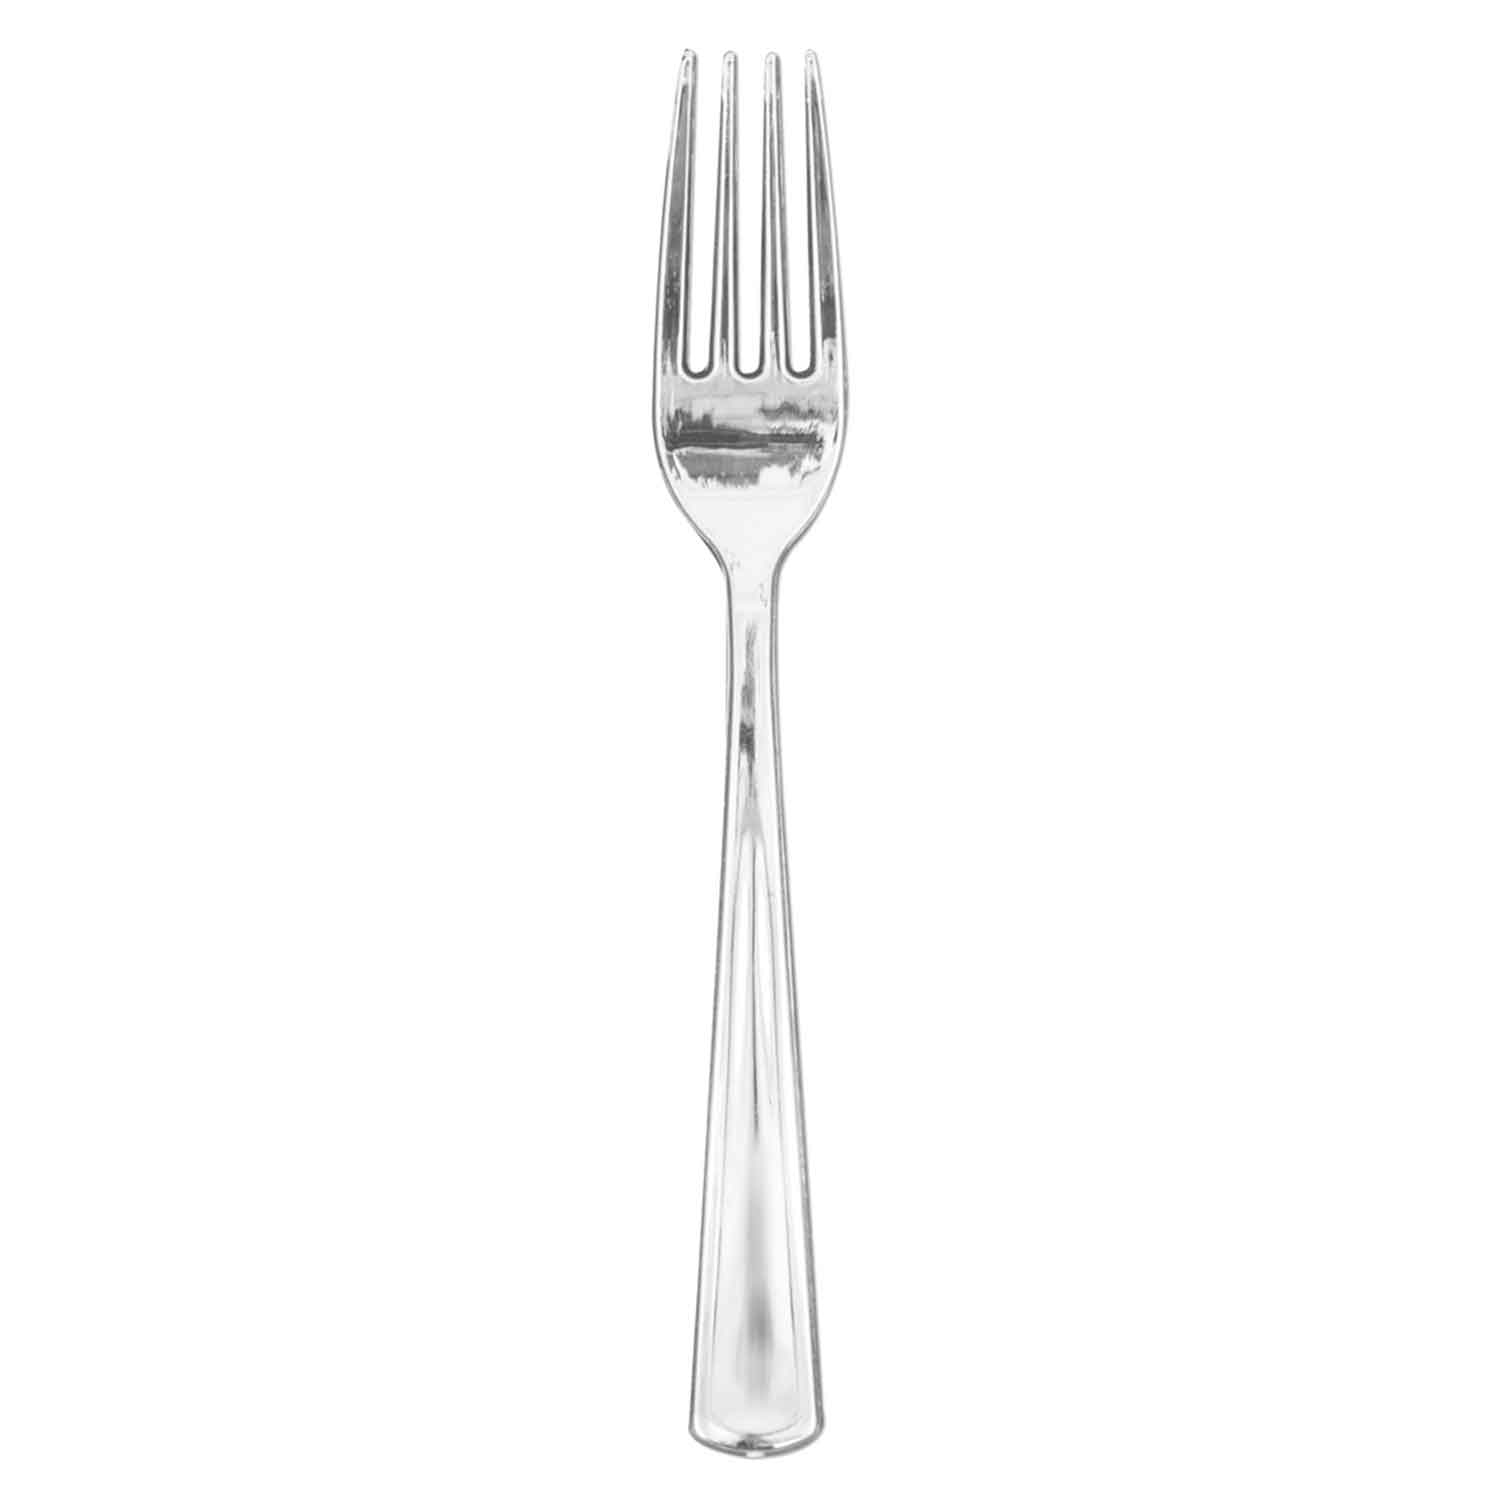 FORK SILVER LOOK HEAVY WEIGHT PS PLASTIC 500/CS